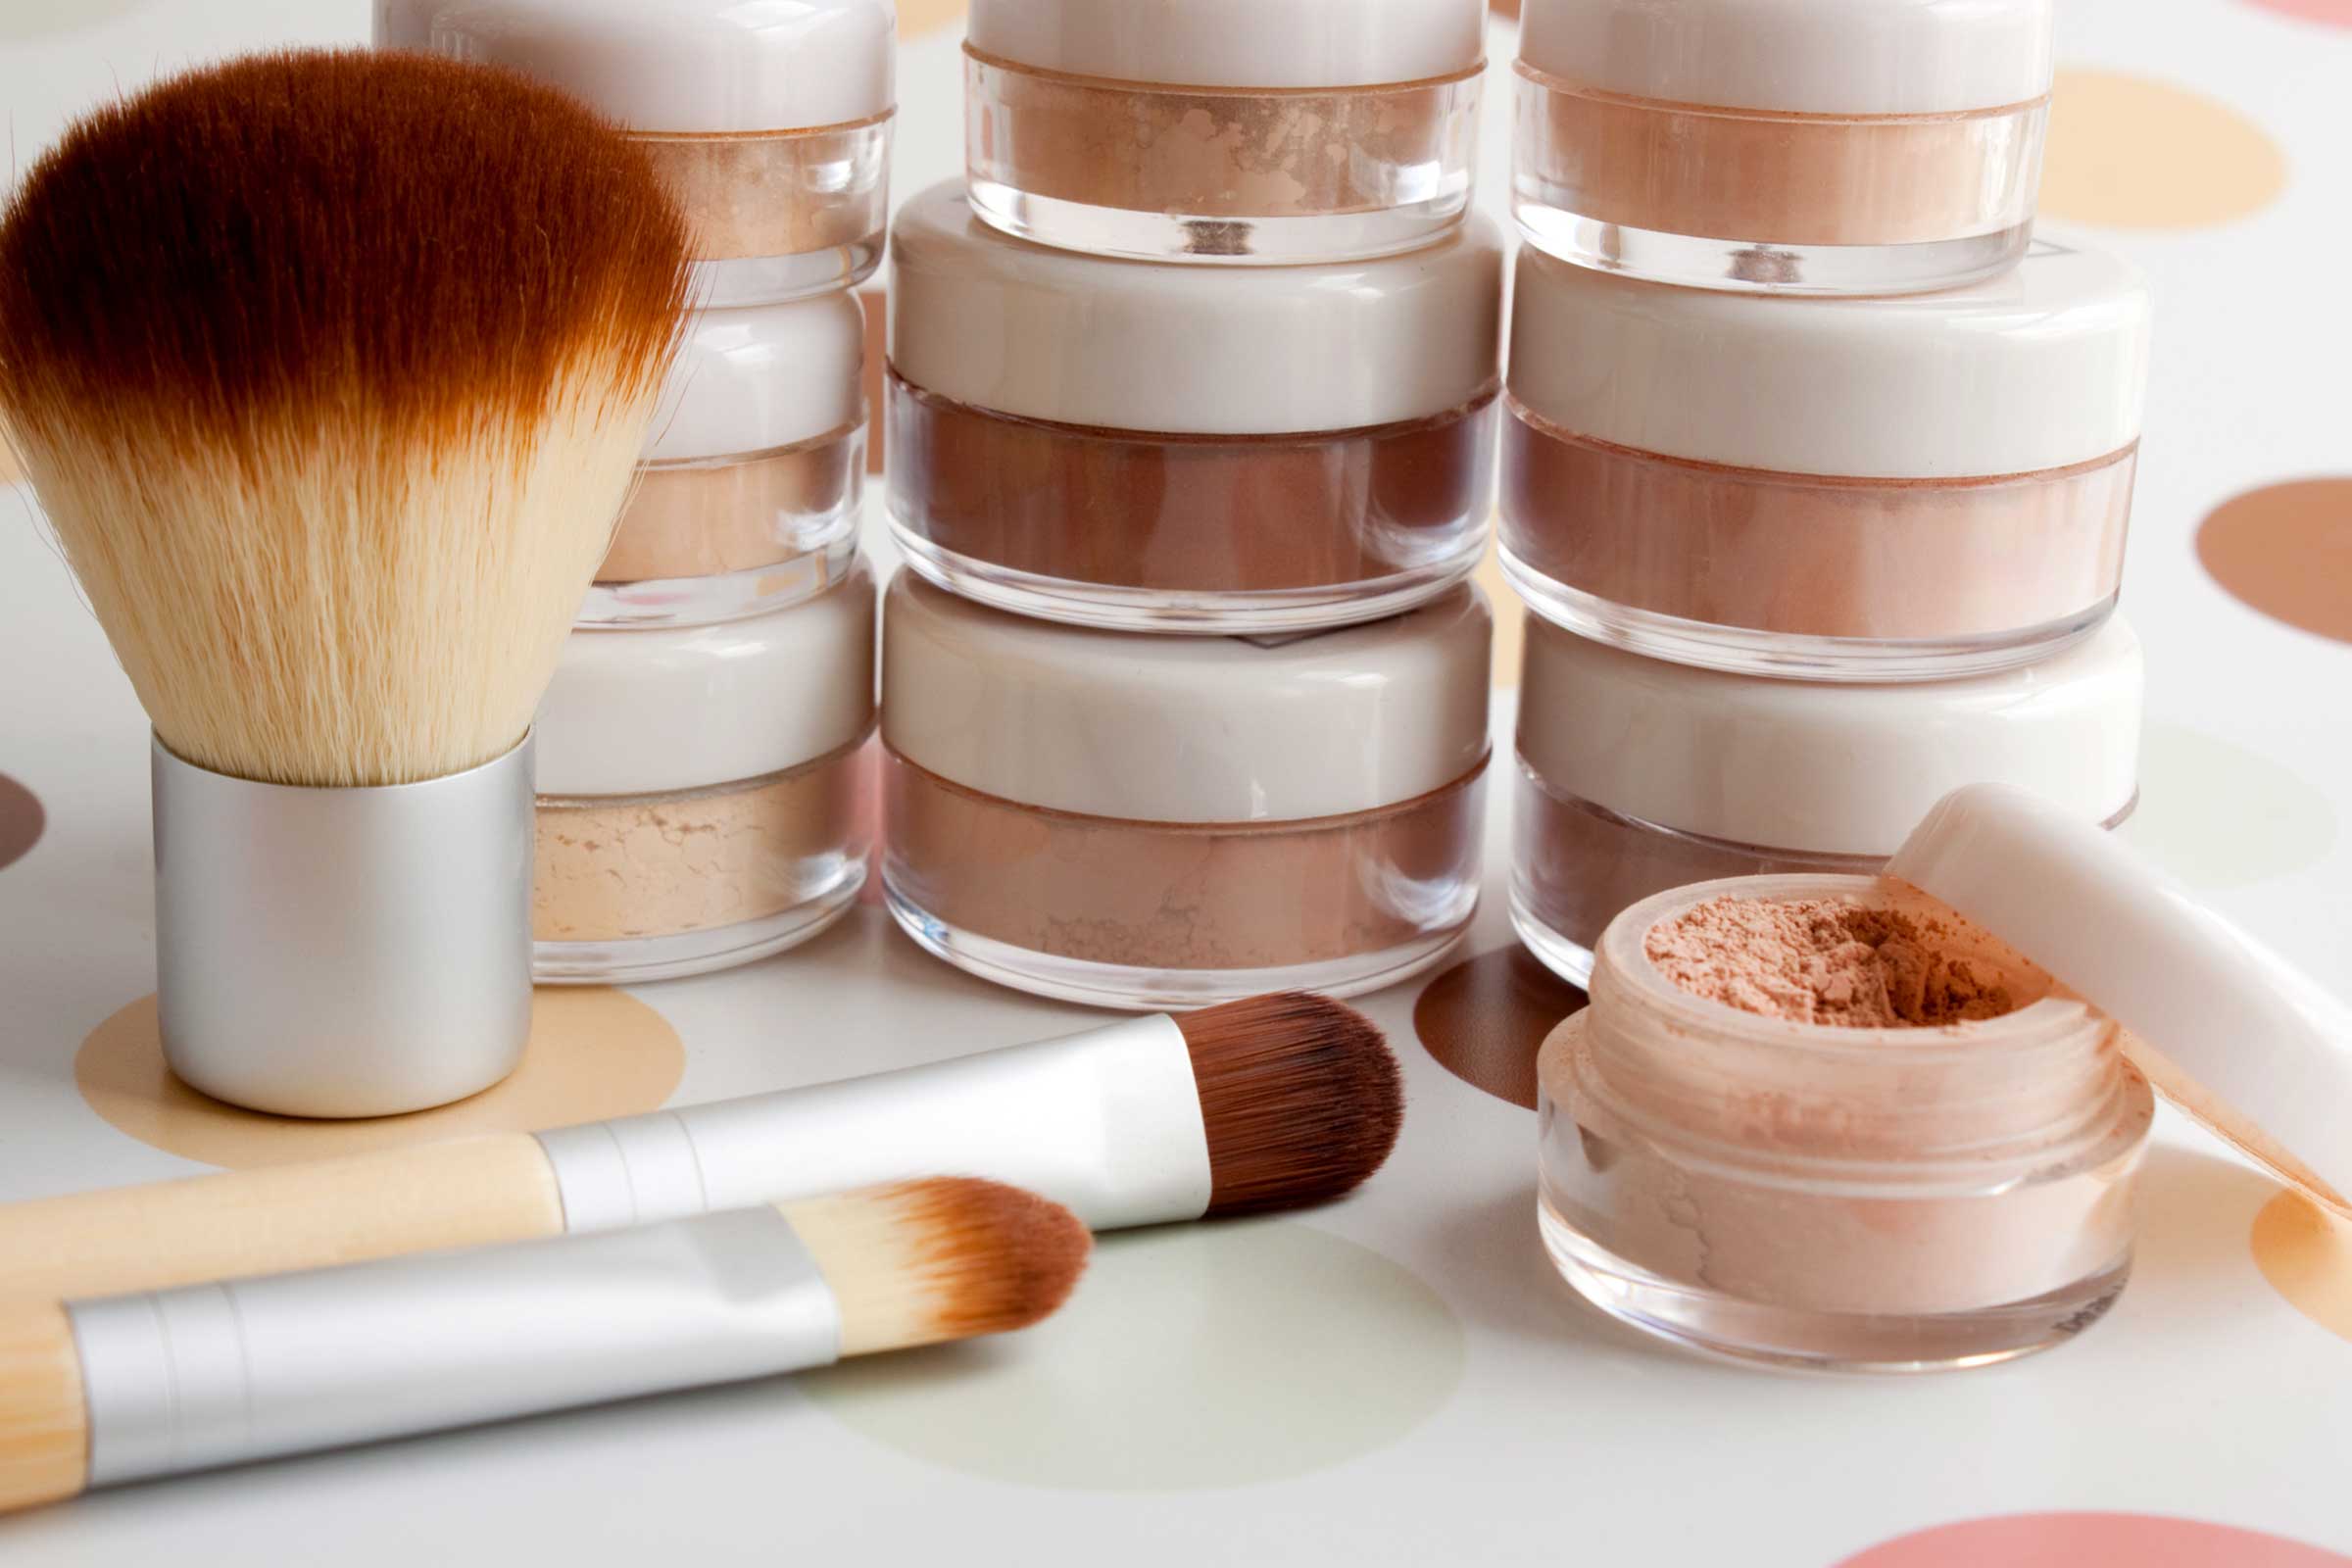 5 Translucent Powders You Might Need for A Flawless Look